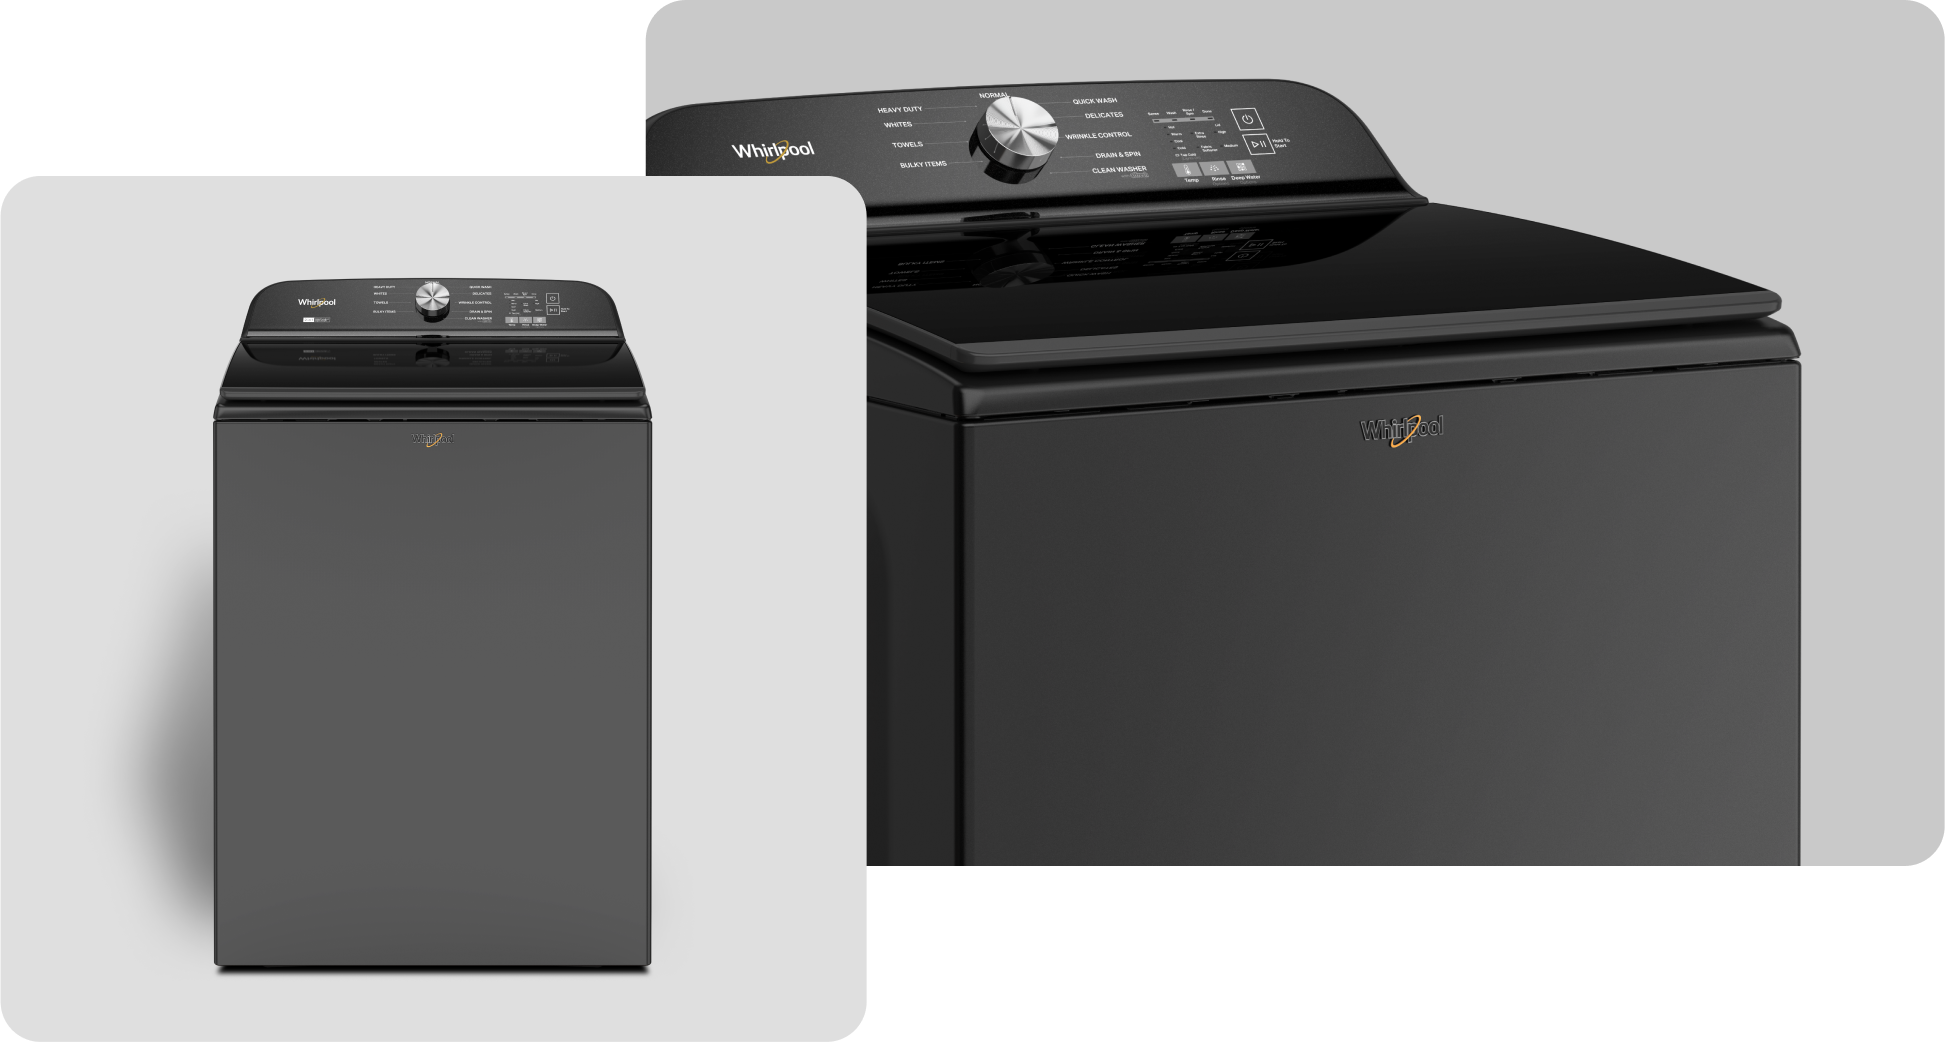 A Whirlpool® Washing Machine with a Volcano Black finish